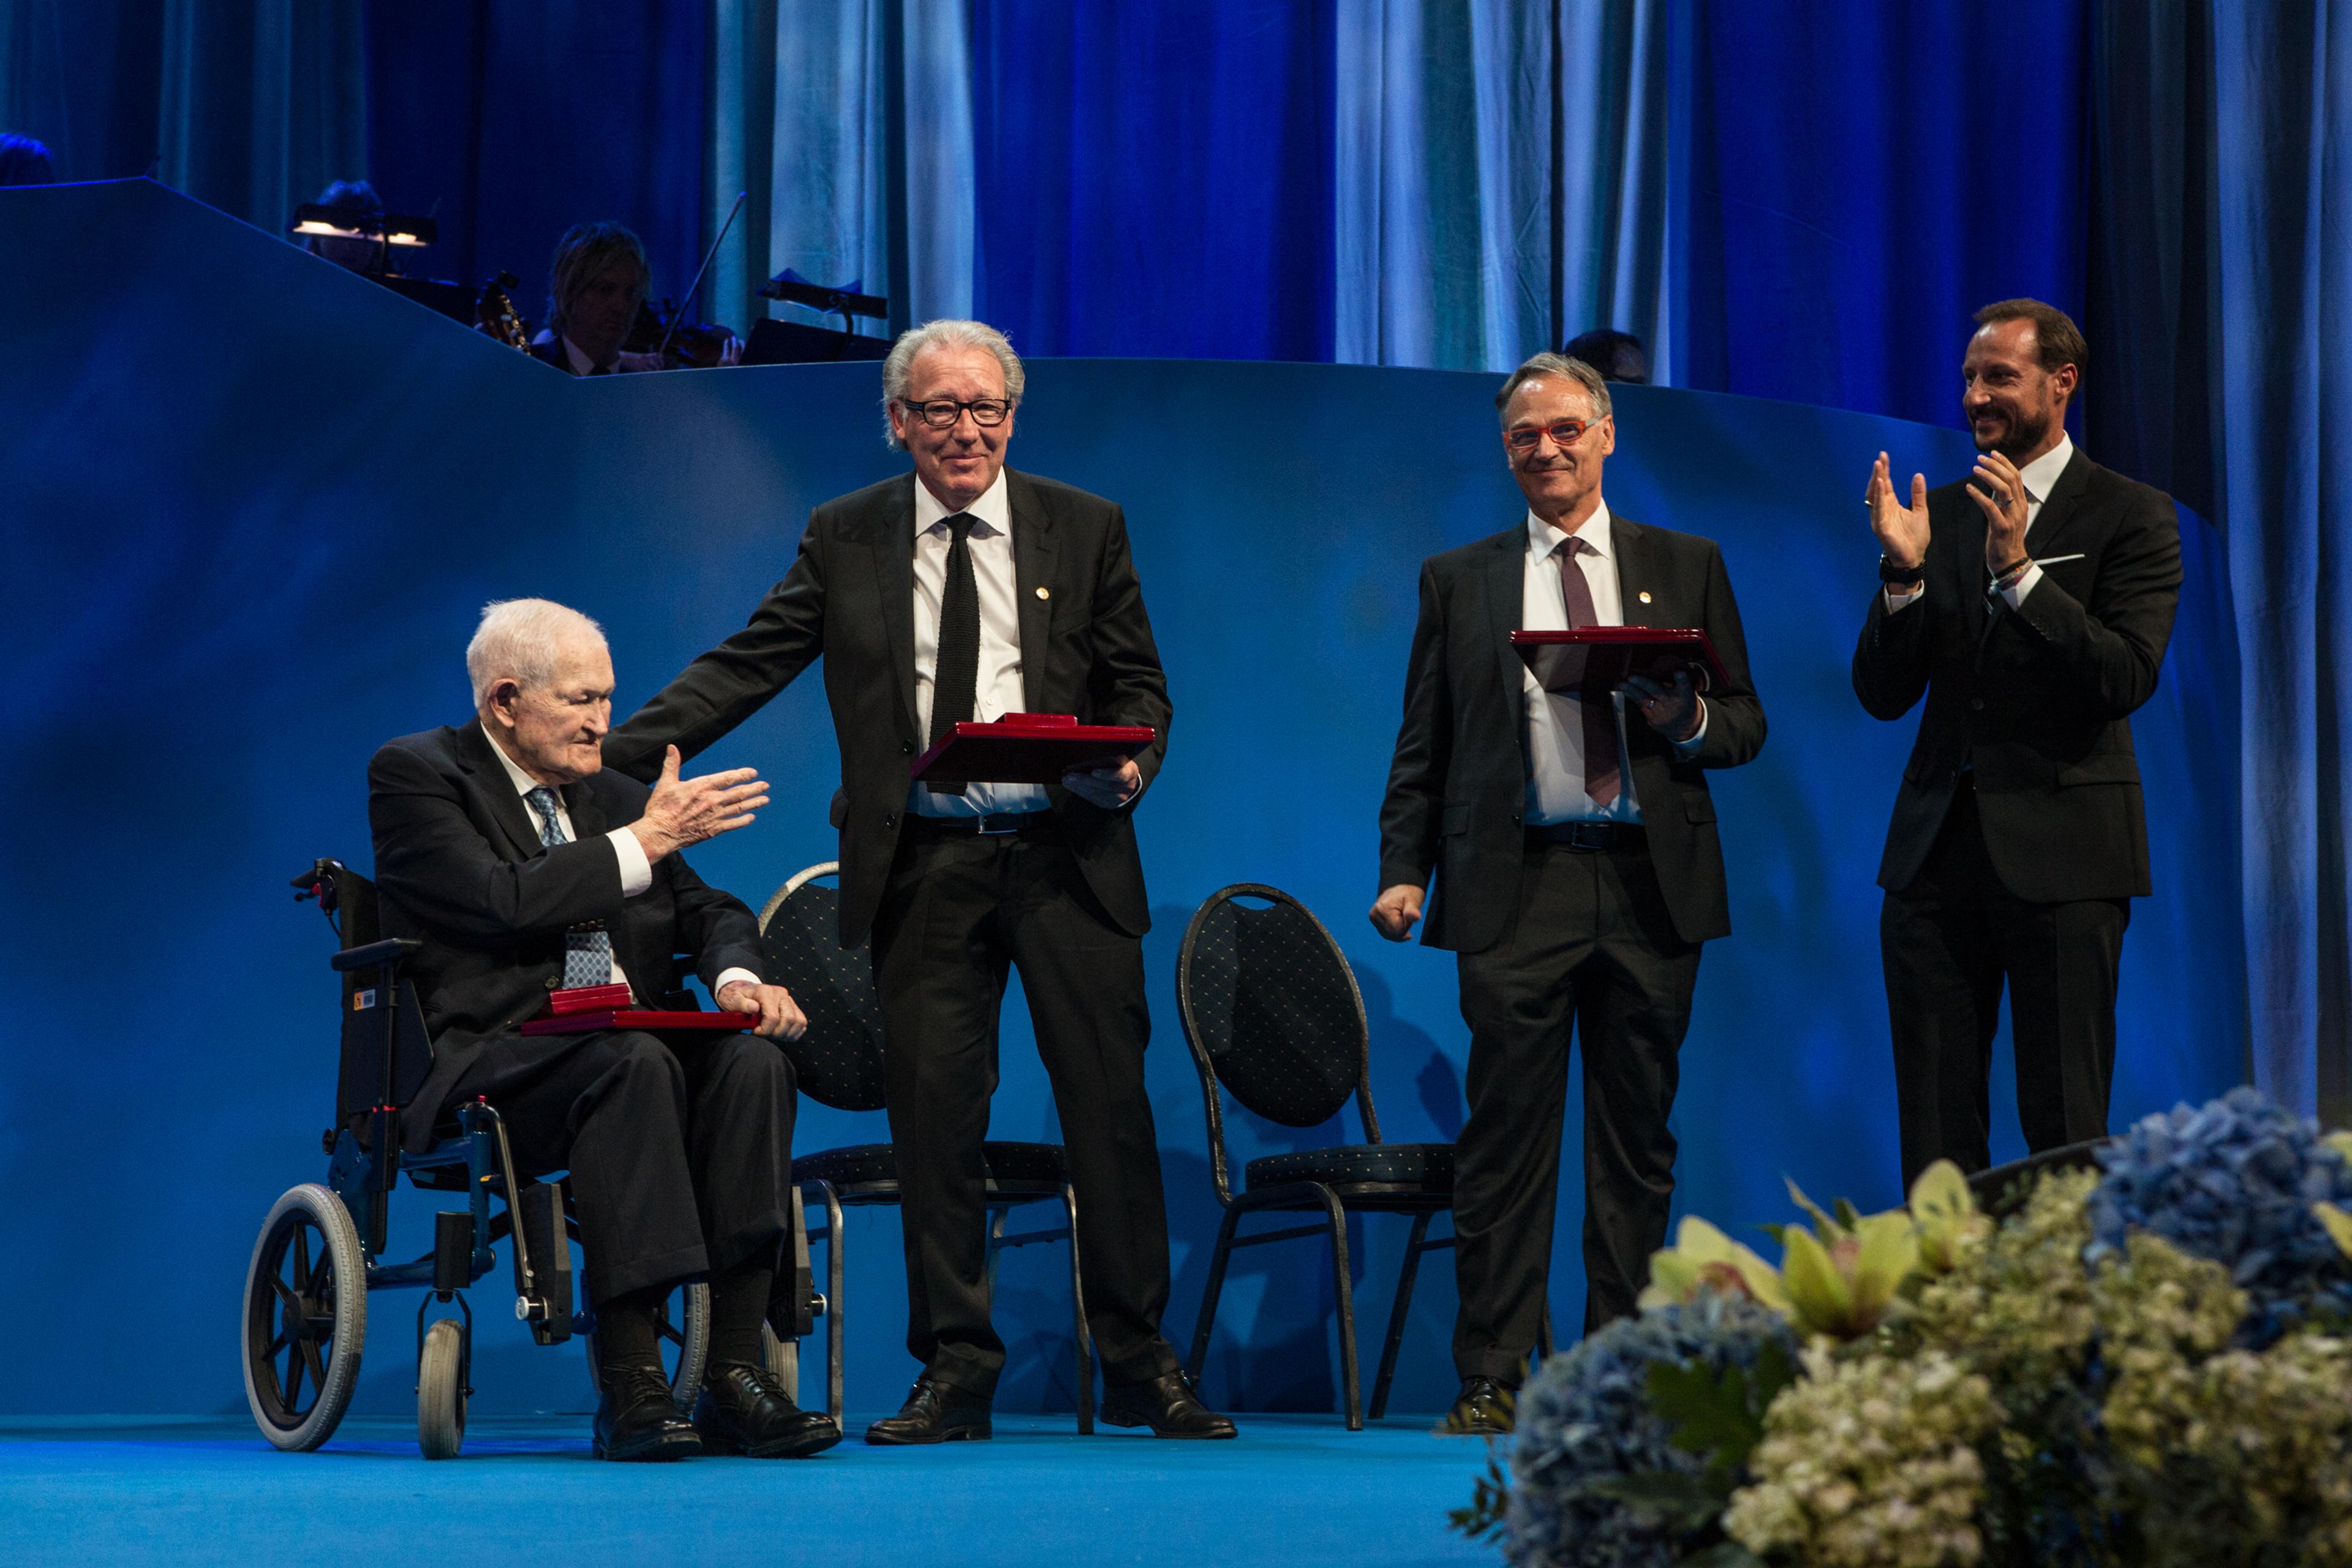 The three nanoscience laureates on stage at the ceremony in Oslo with their awards; from left: Calvin Quate, Chrostoph Gerber, Gerd Binnig and His Royal Highness Crown Prince Haakon